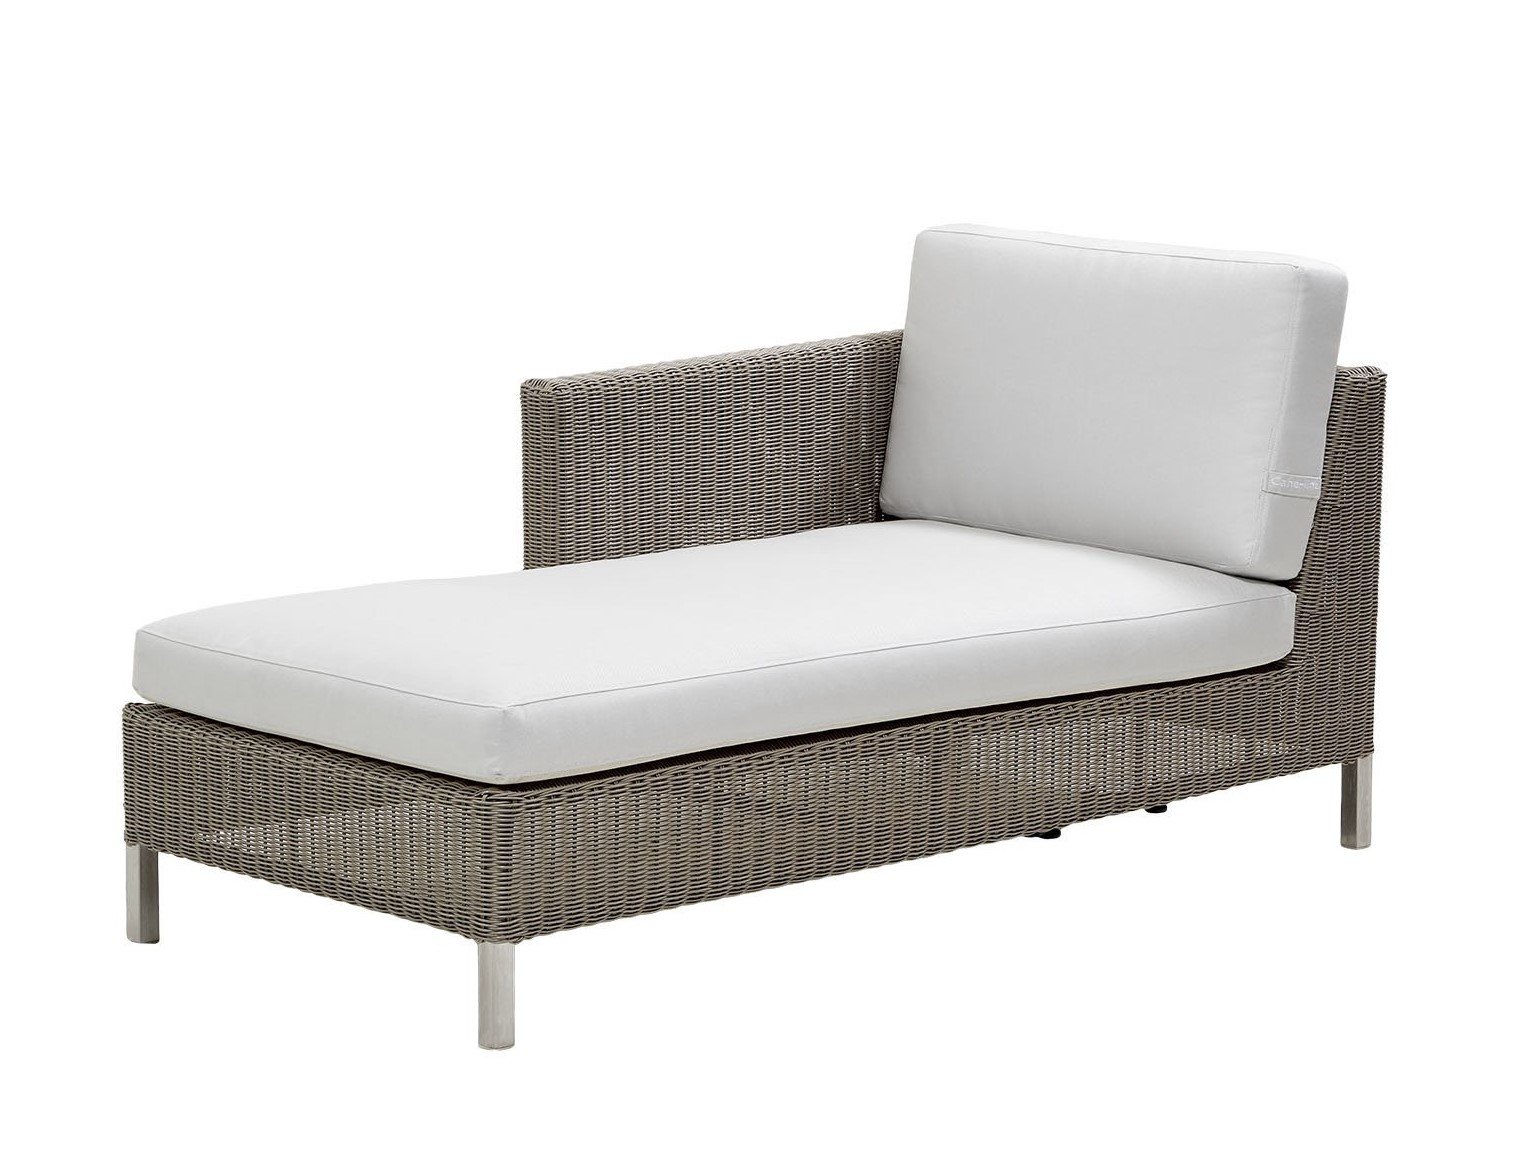 Connect Right Chaise Lounger from Cane-line, designed by Cane-line Design Team